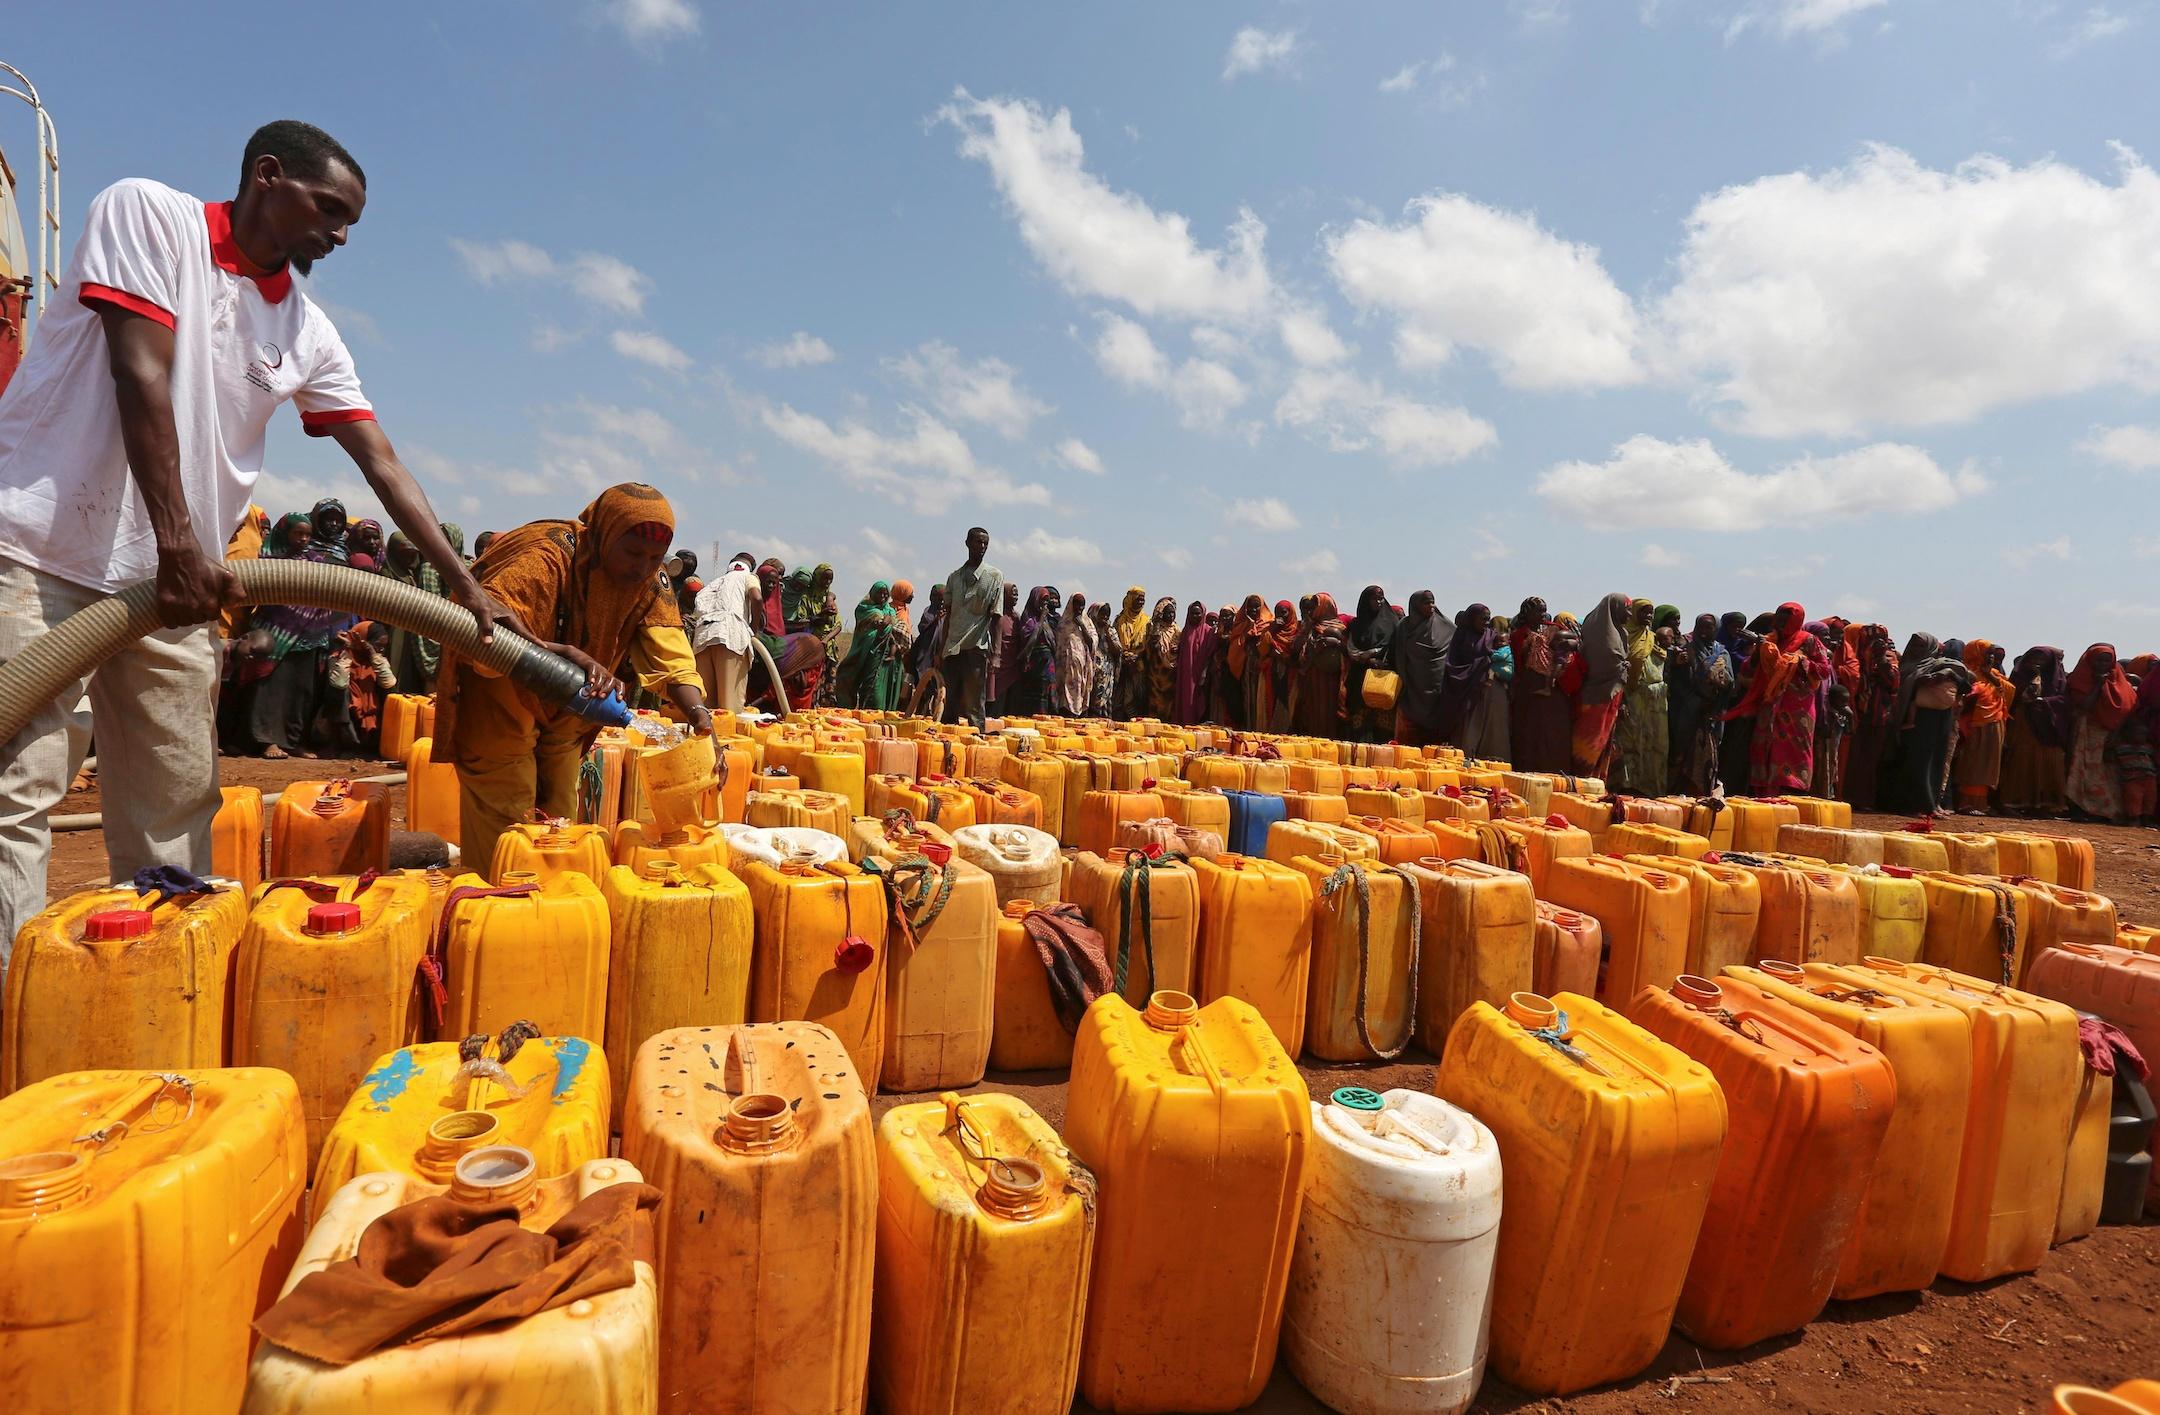 News Wrap: Somalia drought killed 43,000 people in 2022